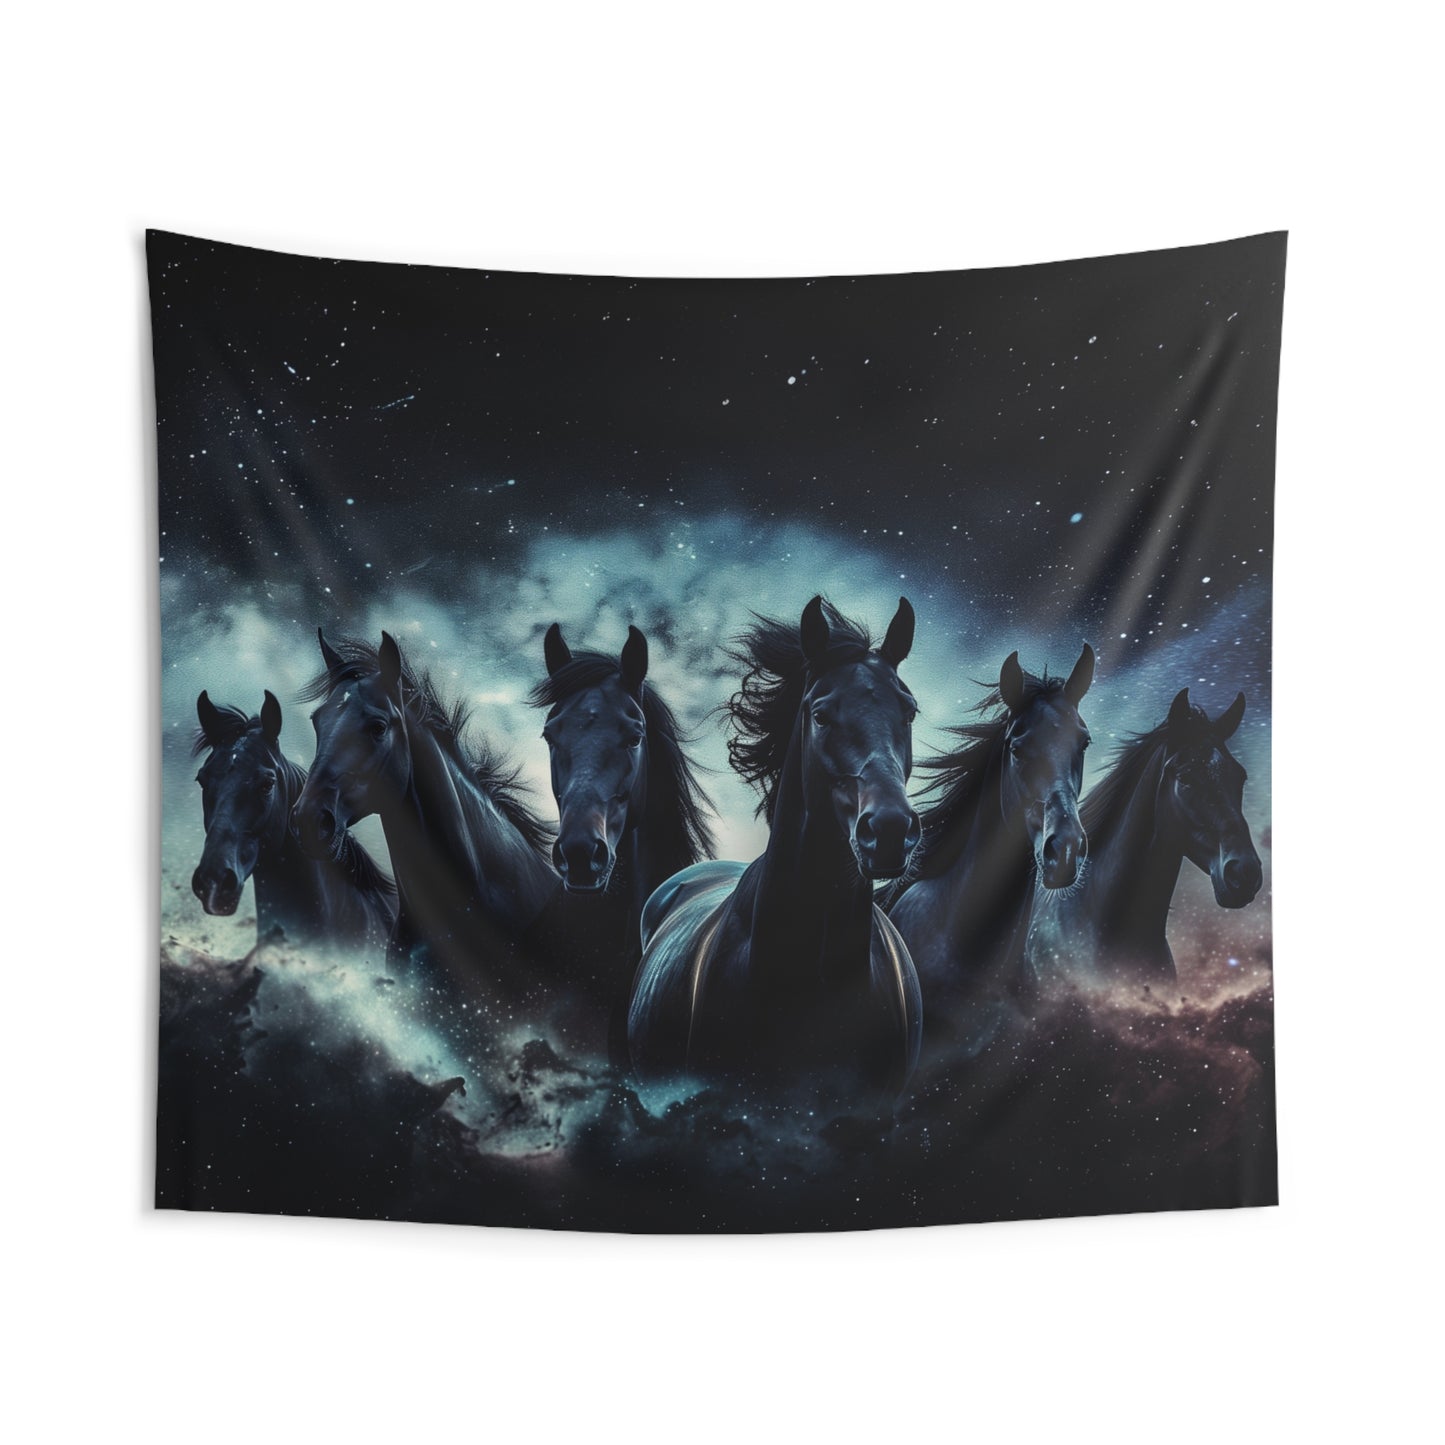 Horses Tapestry, Space Galaxy Stars Wall Art Hanging Cool Unique Landscape Large Small Decor Bedroom College Dorm Room